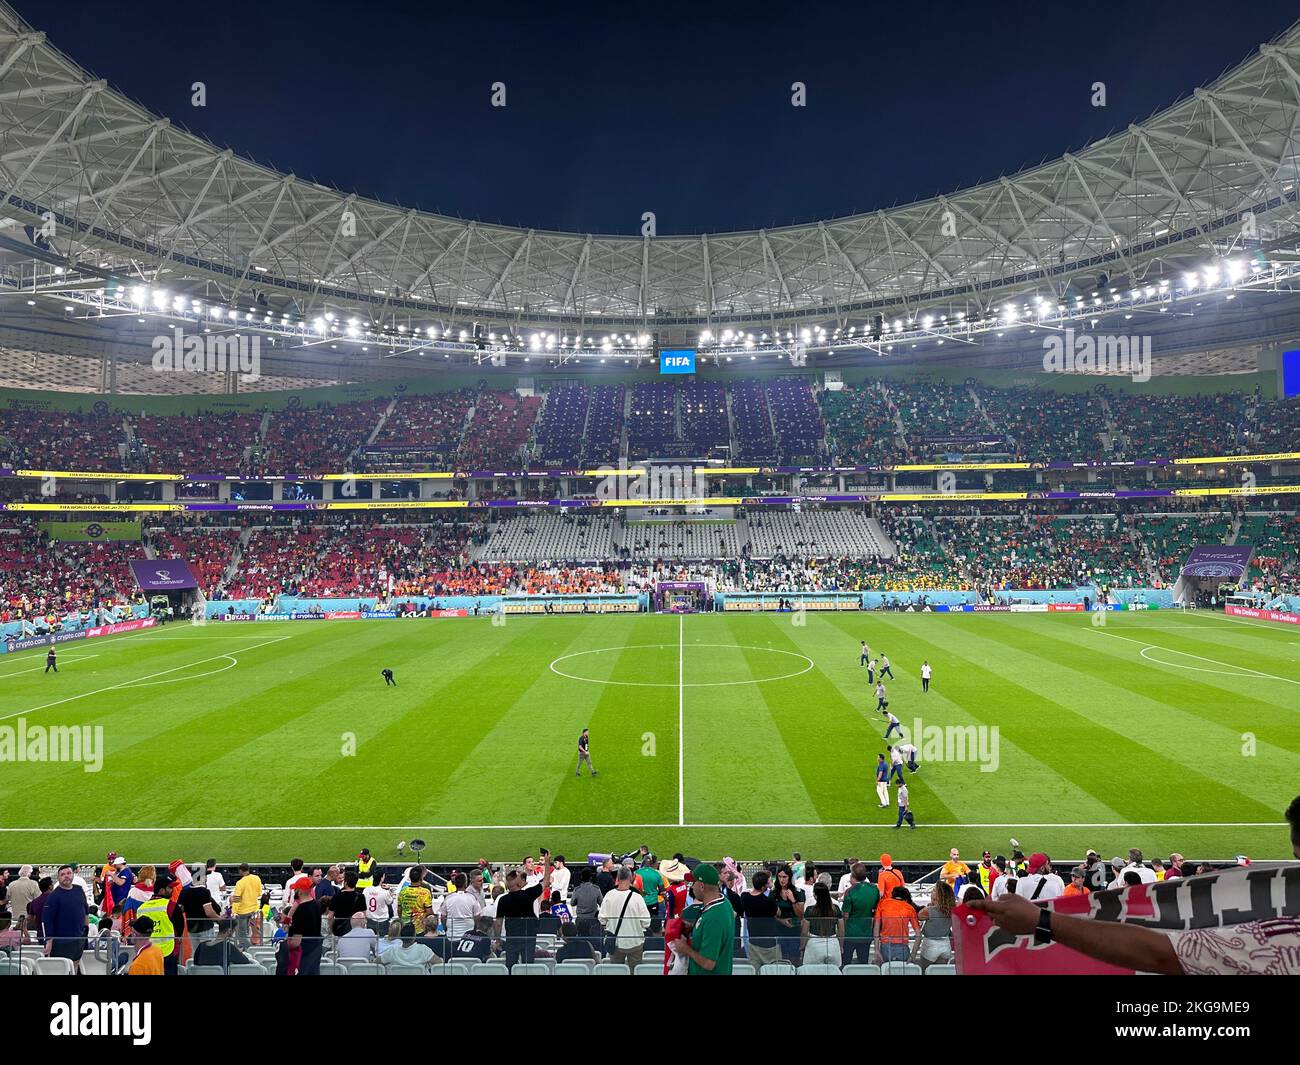 Al Thumama Stadium will host FIFA World Cup Qatar 2022 matches up to and including the quarter-finals - Doha QATAR 2022 Stock Photo